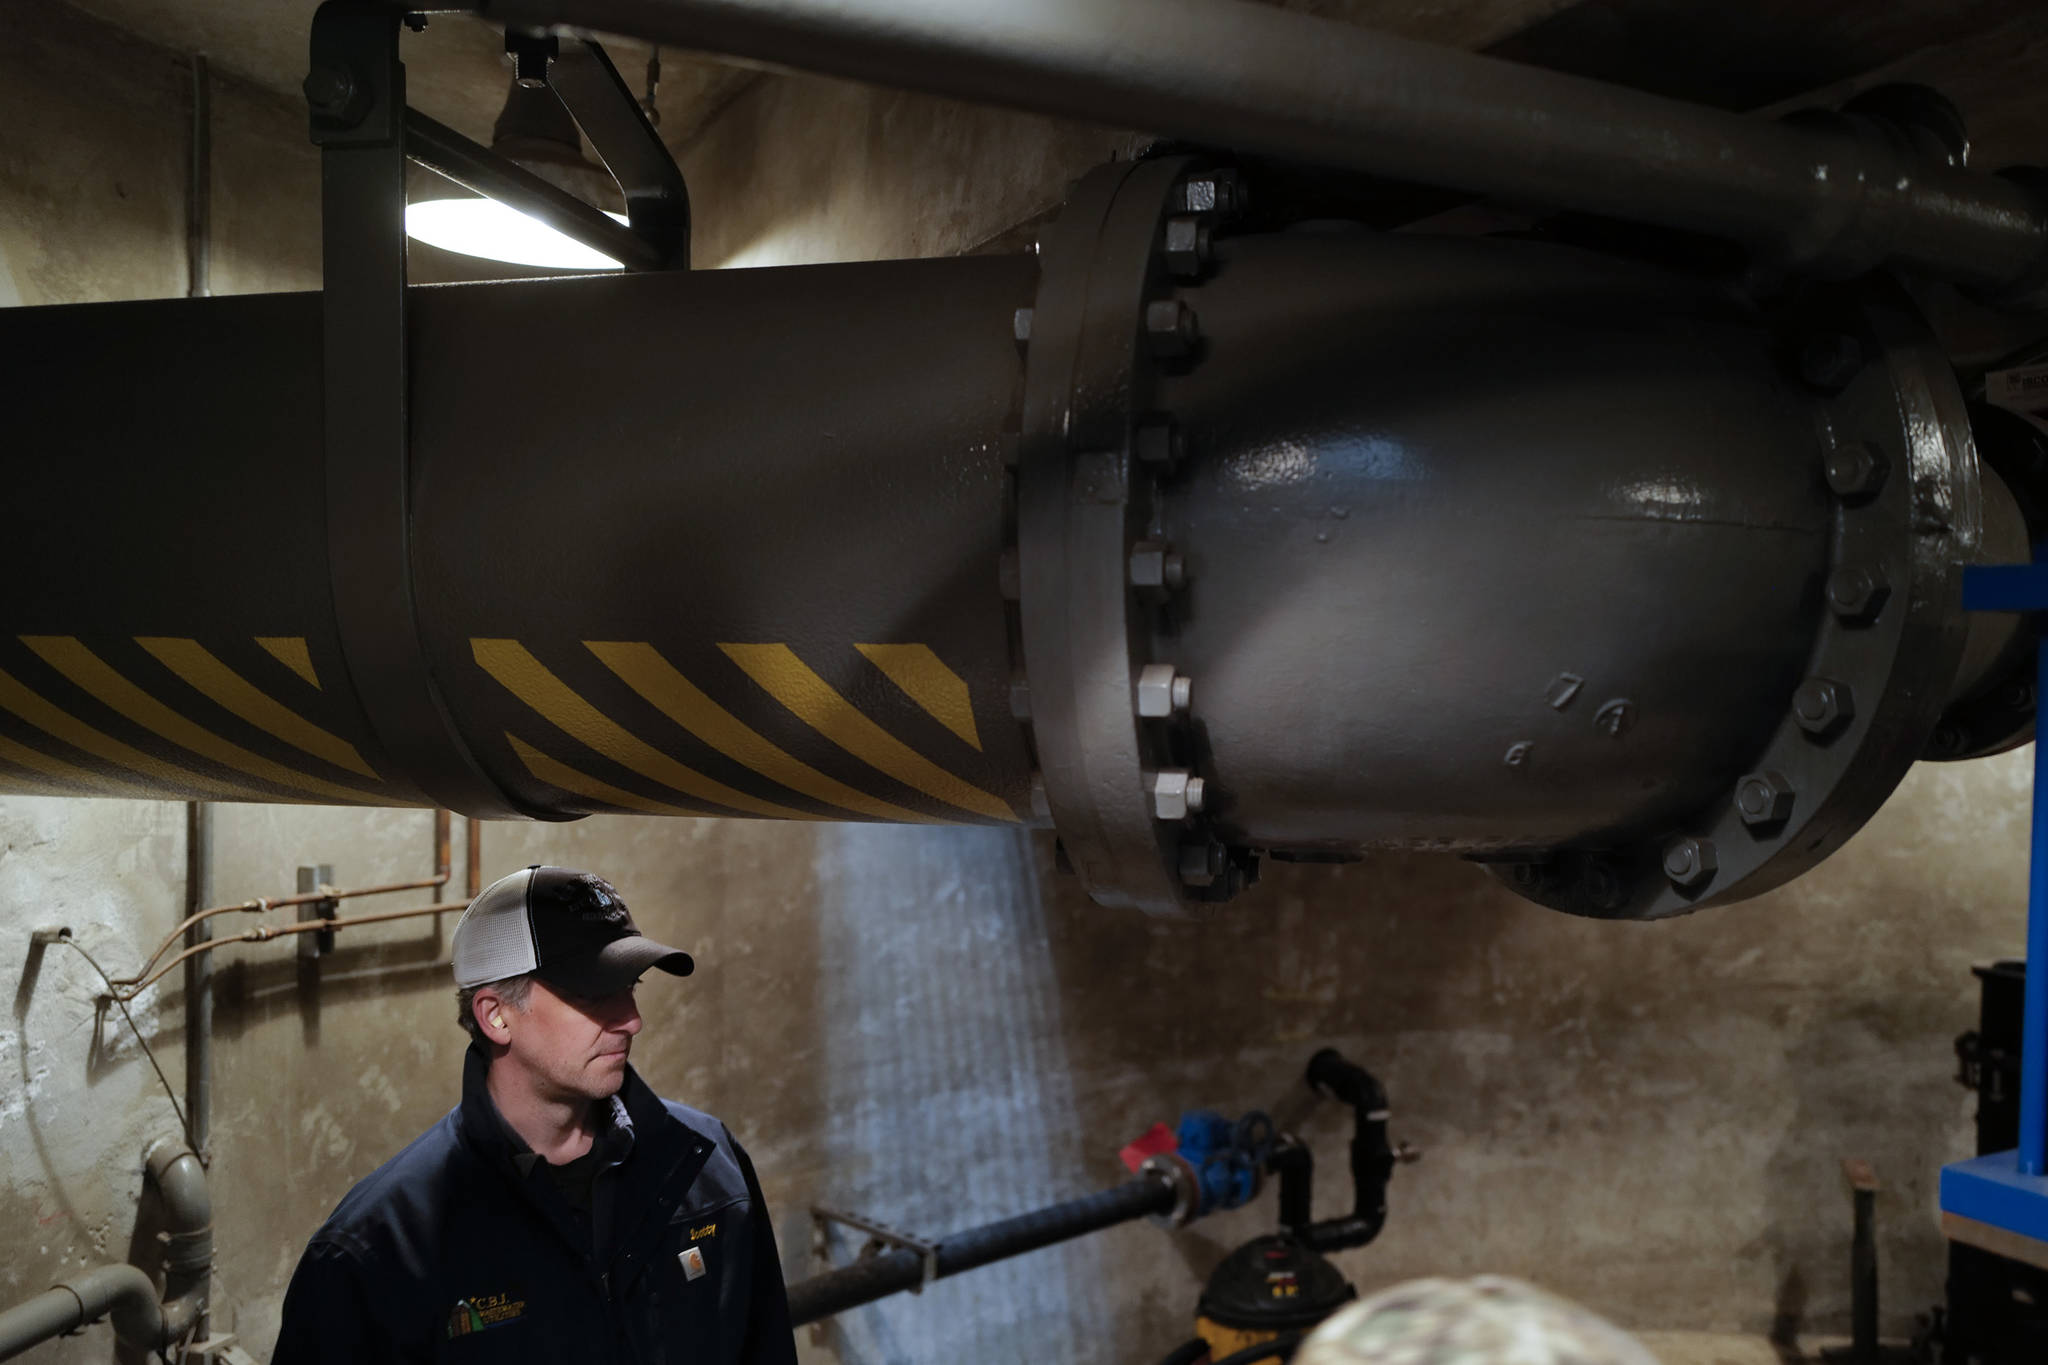 Scott Simonson, a senior wastewater collection officers for the city, stands underneath an outgoing wastewater pipe at theOuter Drive Pumping Station downtown on Friday, Oct. 11, 2019. The three pumps were overwhelmed during last weekend’s storm and caused a backup of sewage into the Mayor Bill Overstreet Park utilities building. (Michael Penn | Juneau Empire)